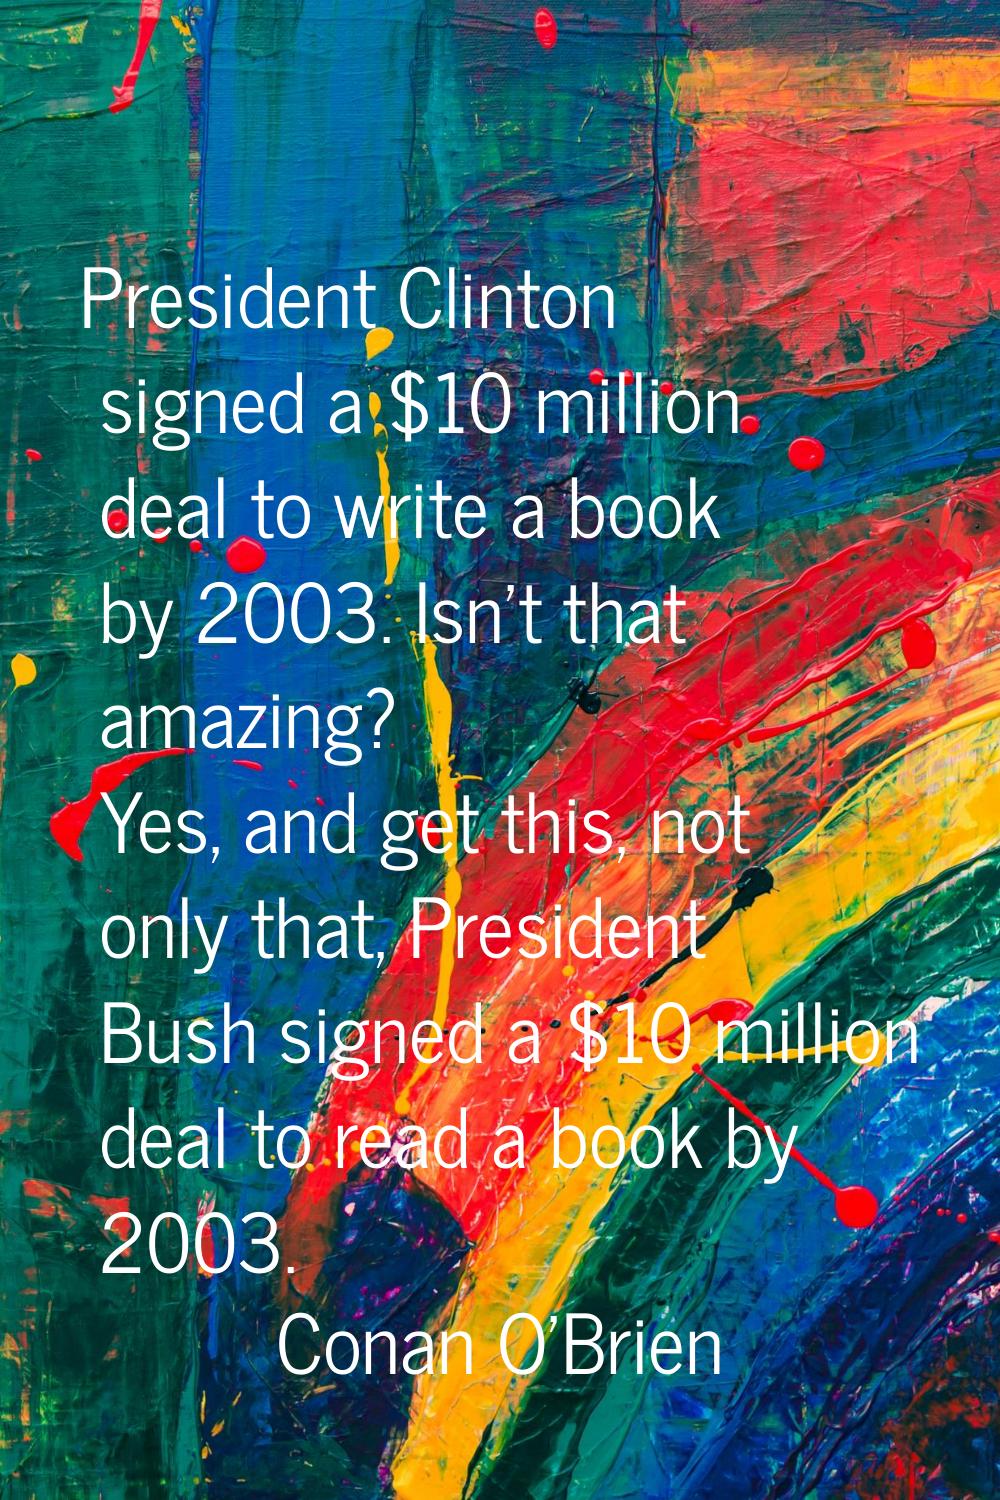 President Clinton signed a $10 million deal to write a book by 2003. Isn't that amazing? Yes, and g